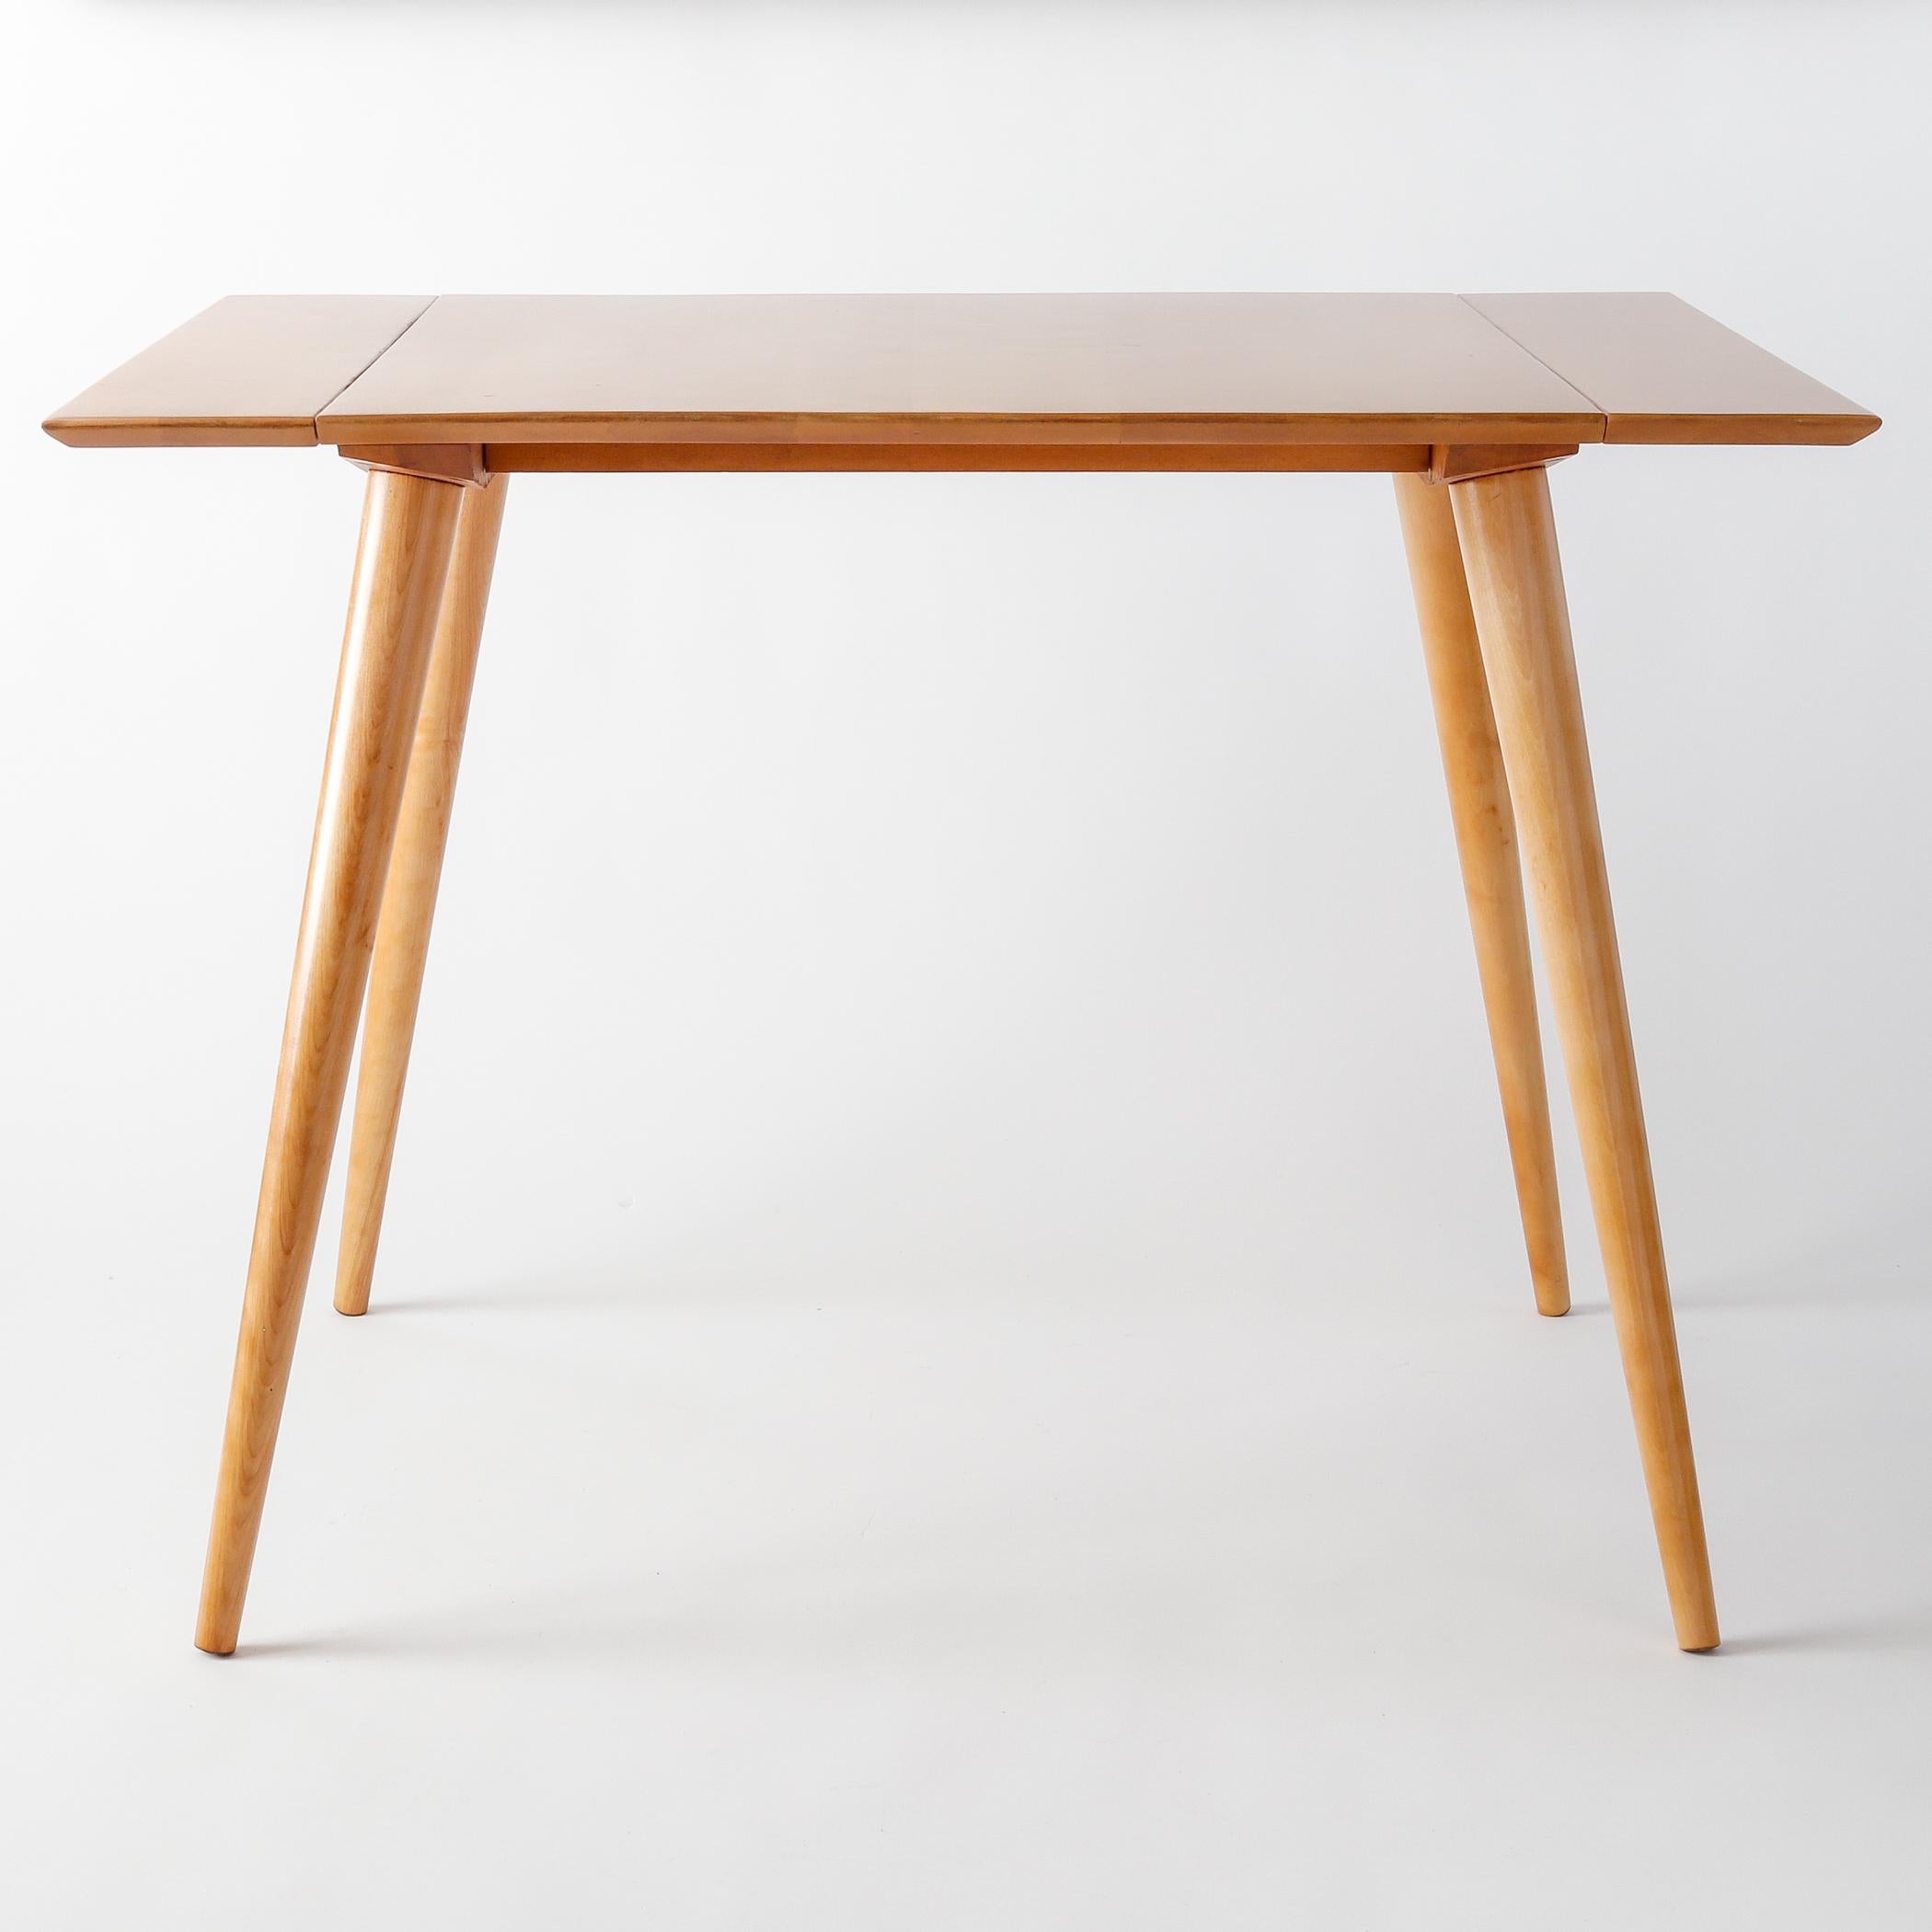 Paul McCobb extension dining table in solid maple from his Planner Group for Winchendon, model 1521. This is the smallest of his dining tables from this line, measuring just 30 x 40 inches without the leaves (each leaf measure 30 x 10 inches).